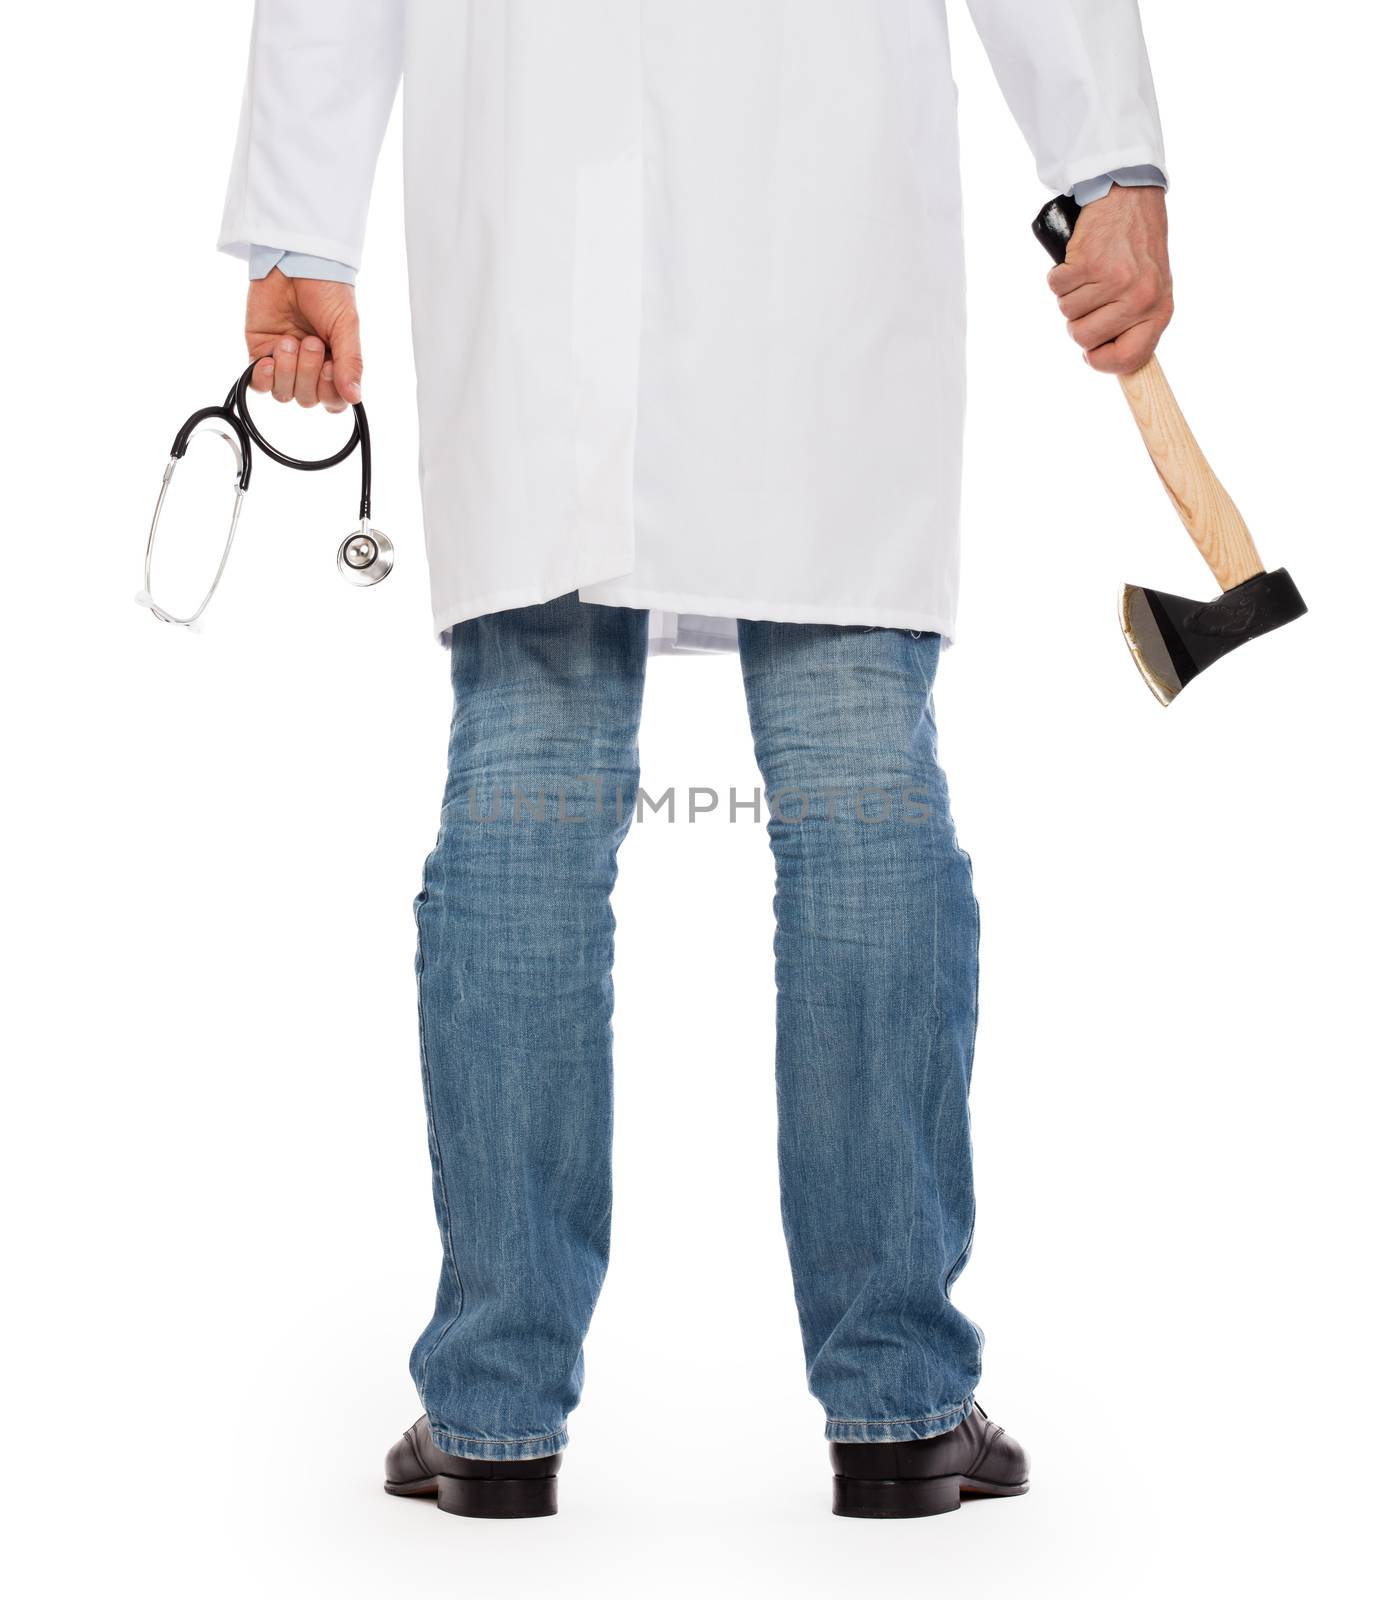 Evil medic holding a small axe and stethoscope by michaklootwijk